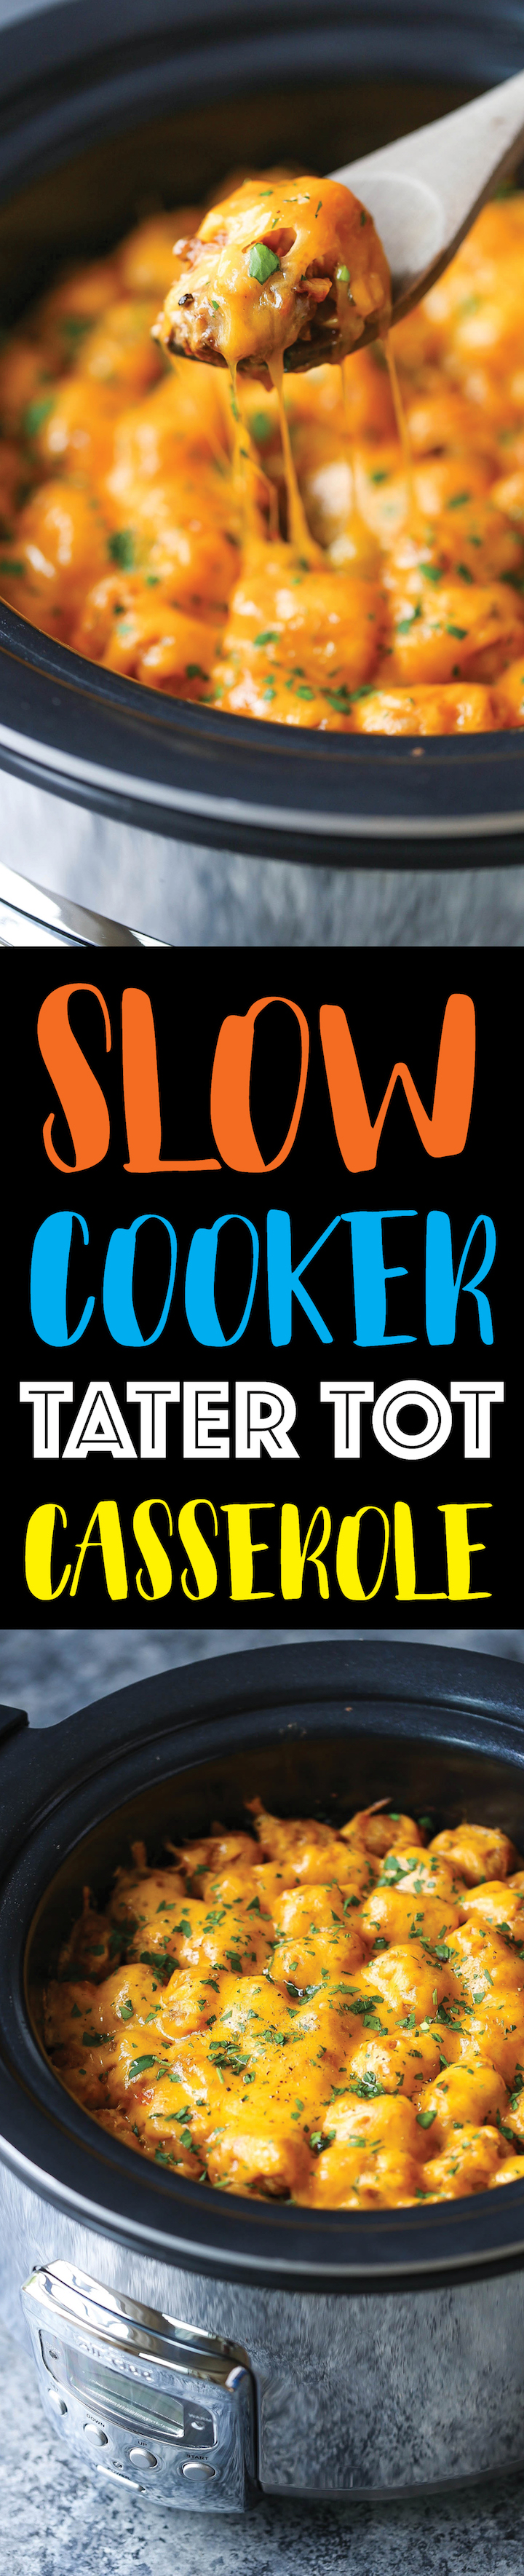 Slow Cooker Tater Tot Casserole - An absolute crowd-pleaser! Loaded with ground beef, cheese and everyone's fave: TATER TOTS! Made in the crockpot! EASY!!!